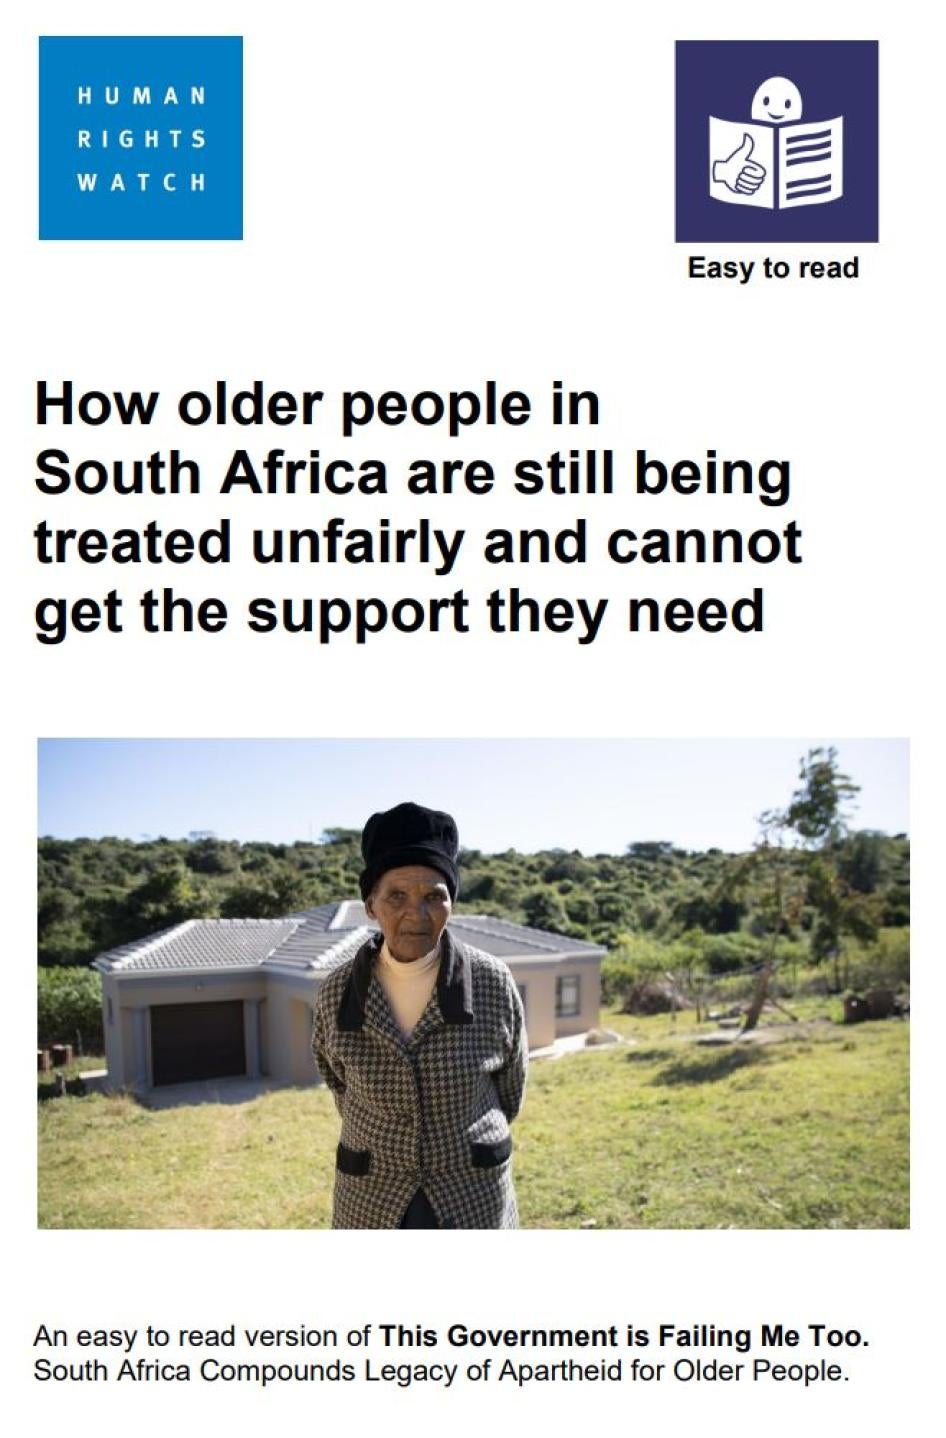 The front cover of the easy-to-read version of the report. The title reads 'How older people in South Africa are still being treated unfairly and cannot get the support they need'. Underneath there is a photo of an older woman, with her house in the background.